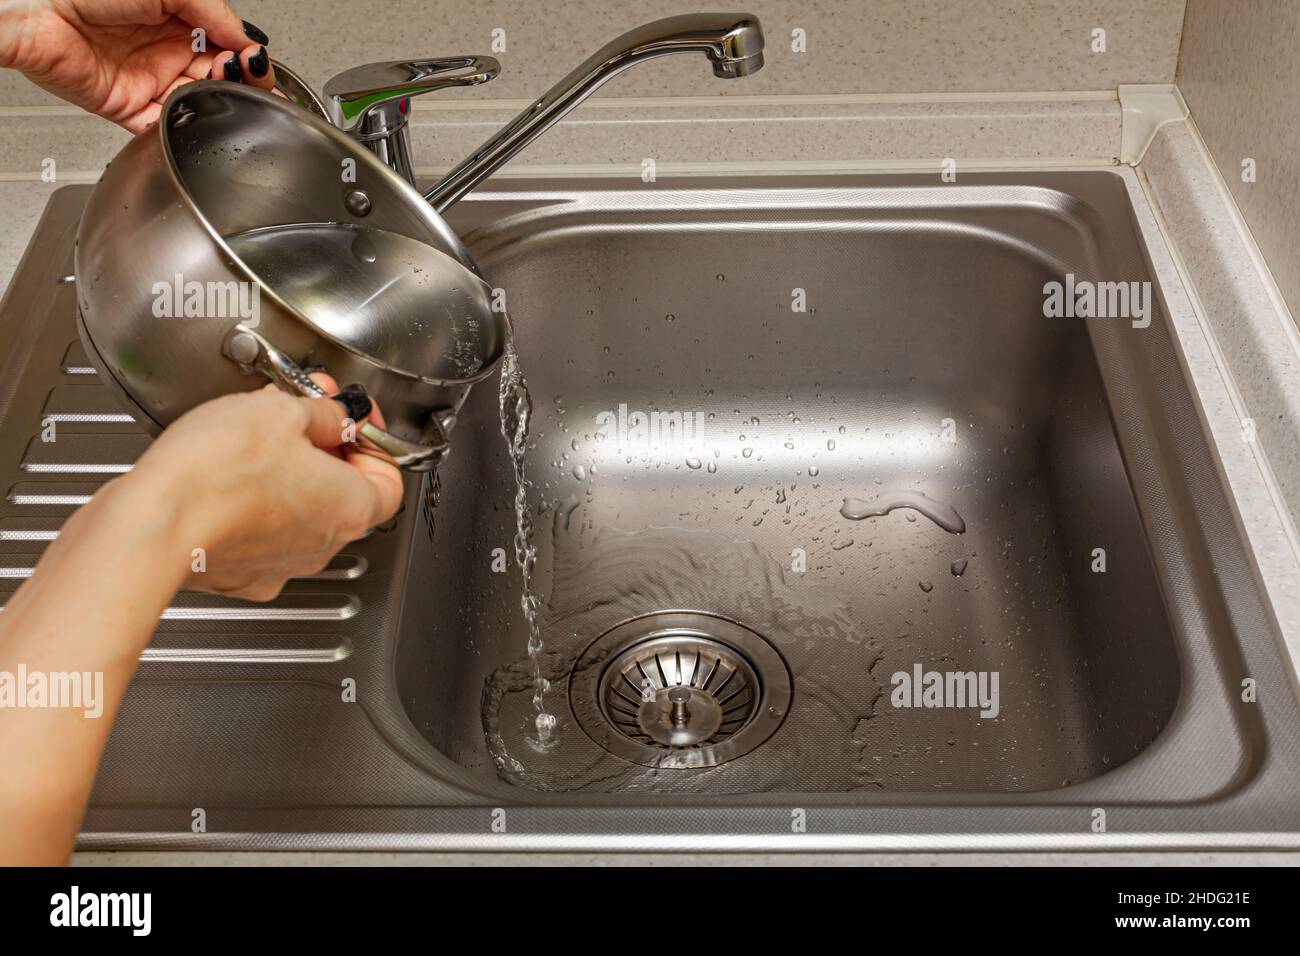 female hands pouring water from the pan into the sink in the kitchen Stock Photo